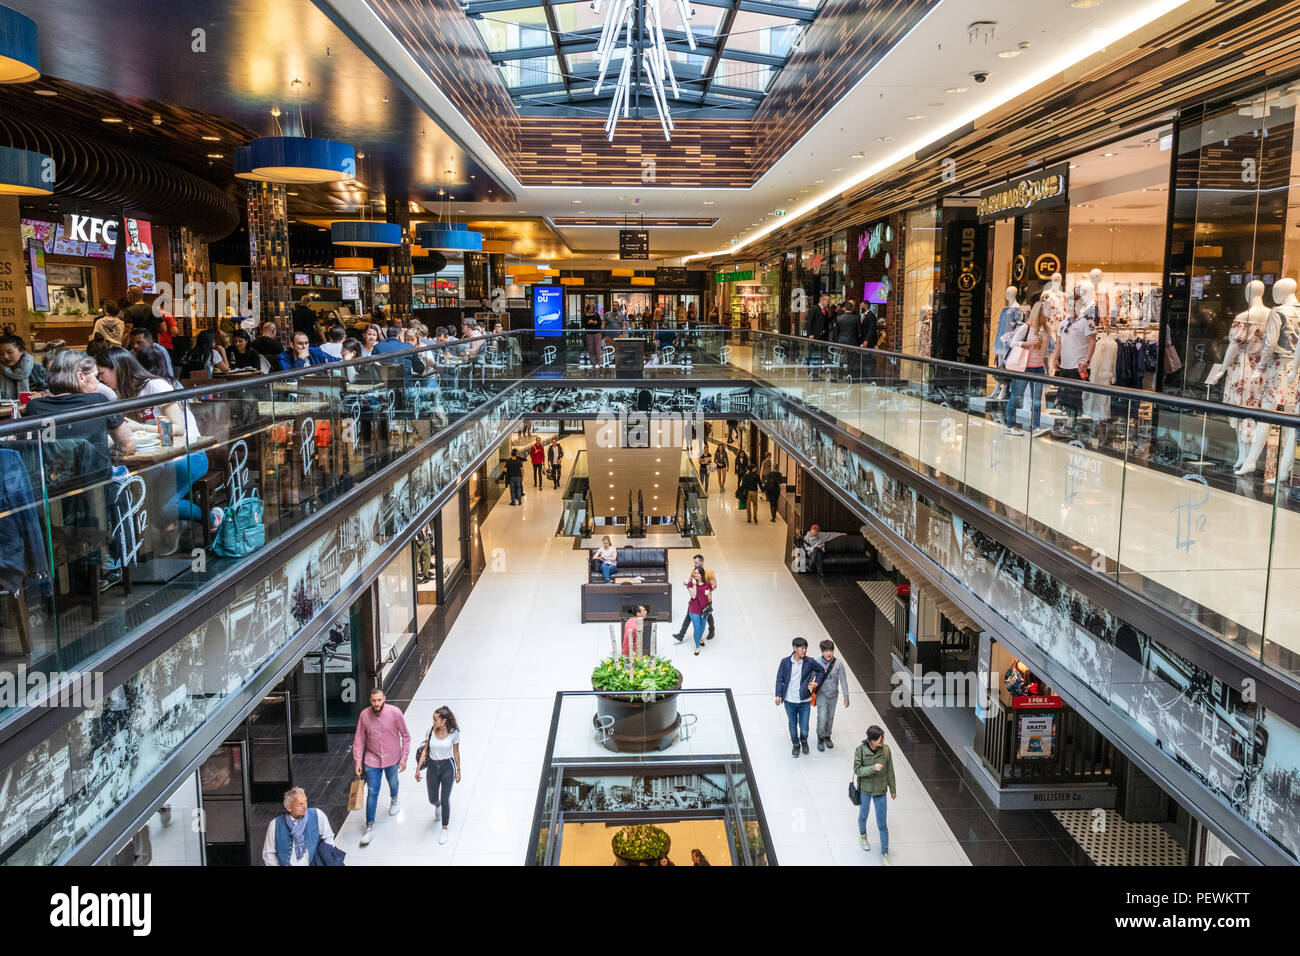 New Mall Of Berlin High Resolution Stock Photography and Images - Alamy